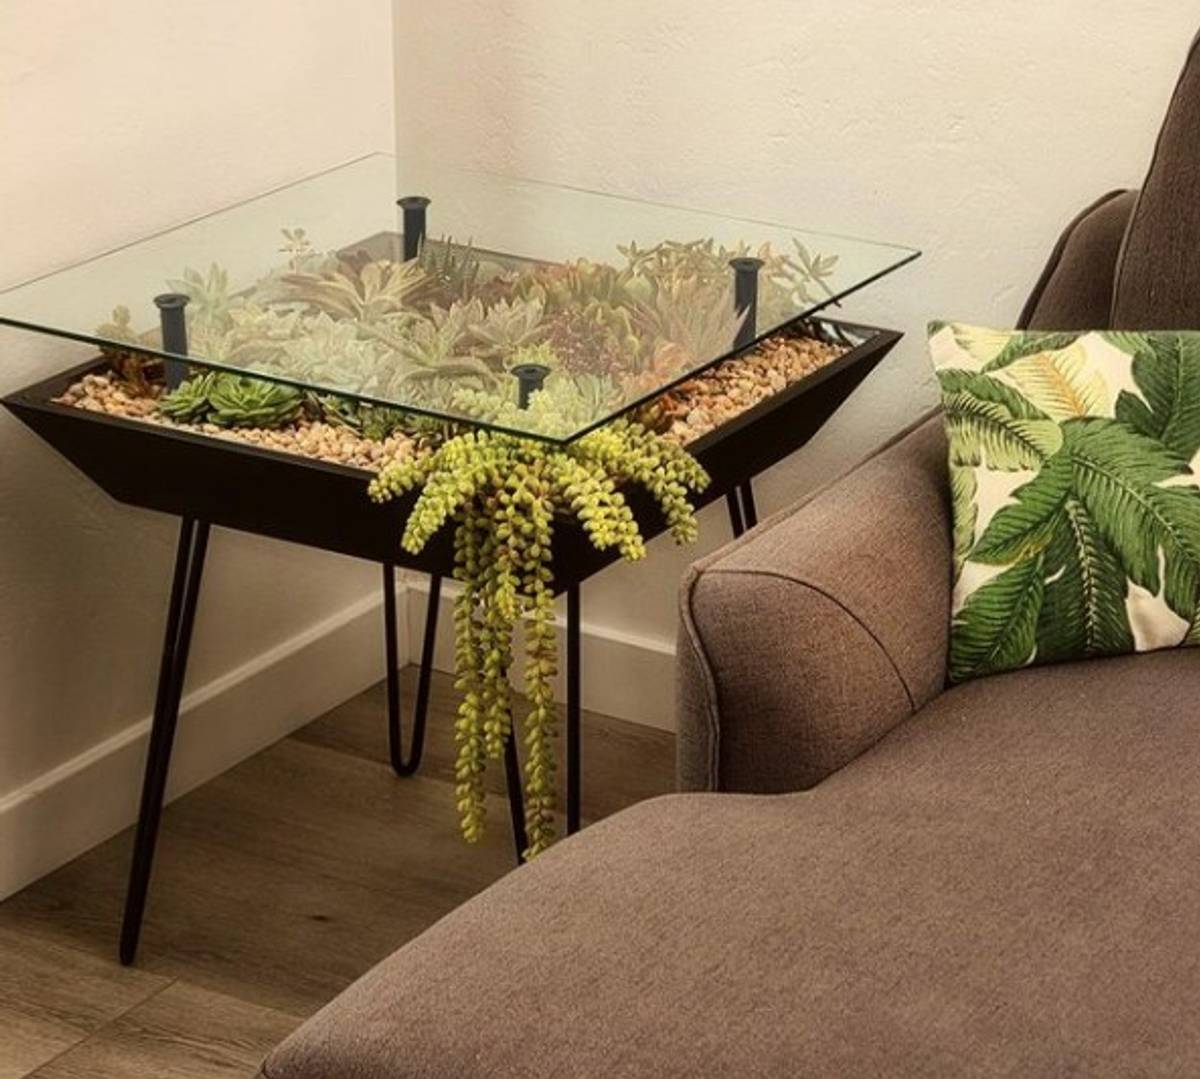 People are rewilding at home with 'living' furniture